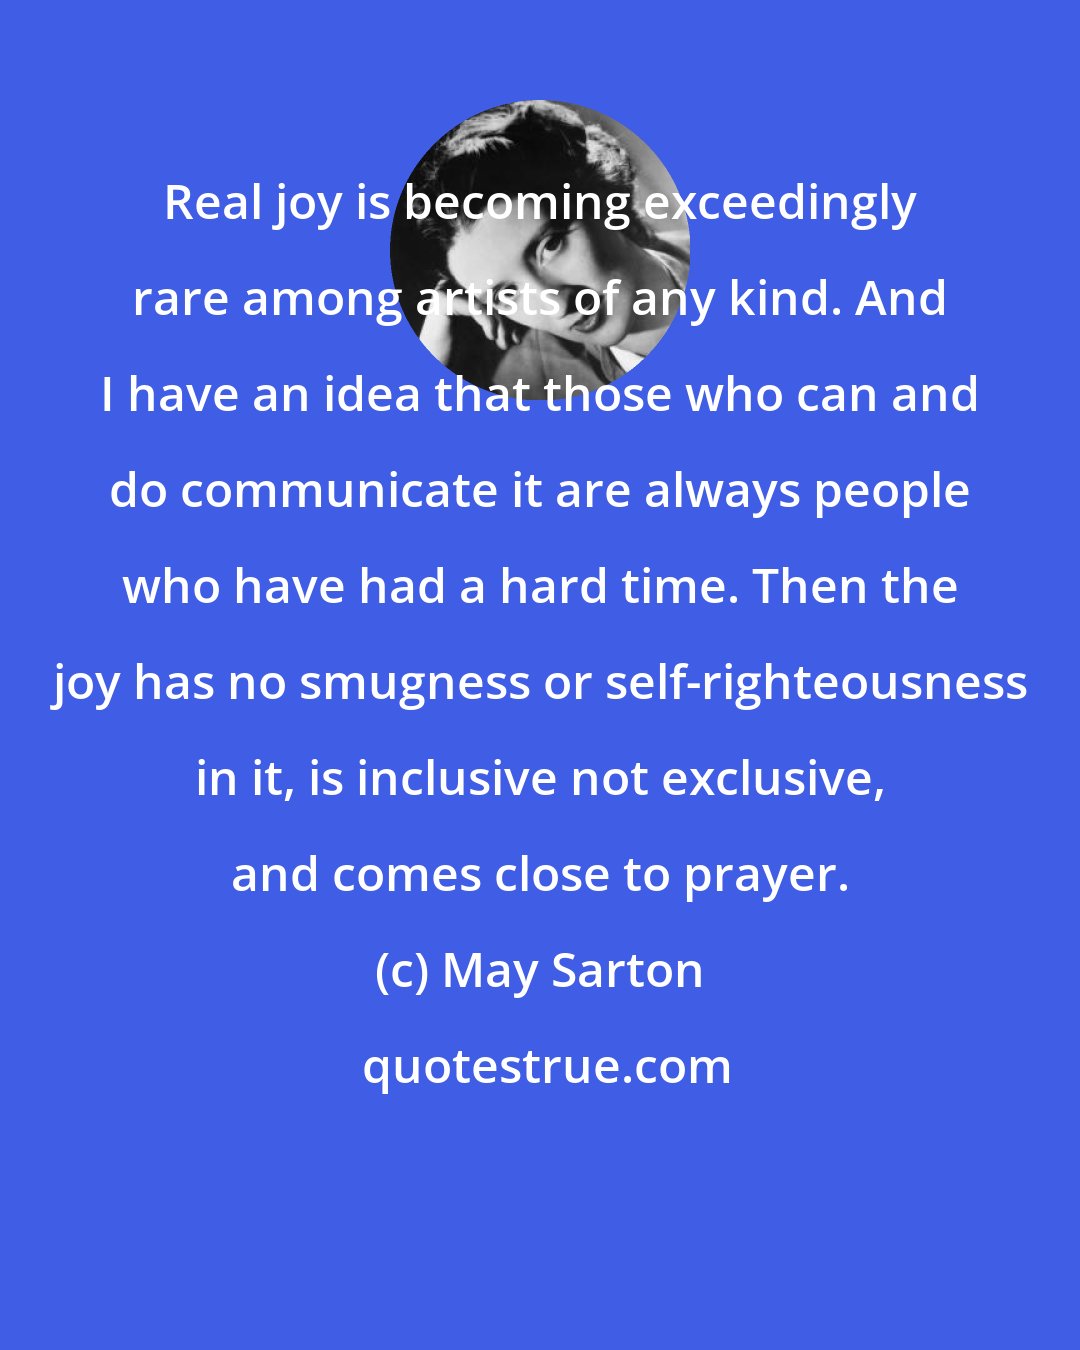 May Sarton: Real joy is becoming exceedingly rare among artists of any kind. And I have an idea that those who can and do communicate it are always people who have had a hard time. Then the joy has no smugness or self-righteousness in it, is inclusive not exclusive, and comes close to prayer.